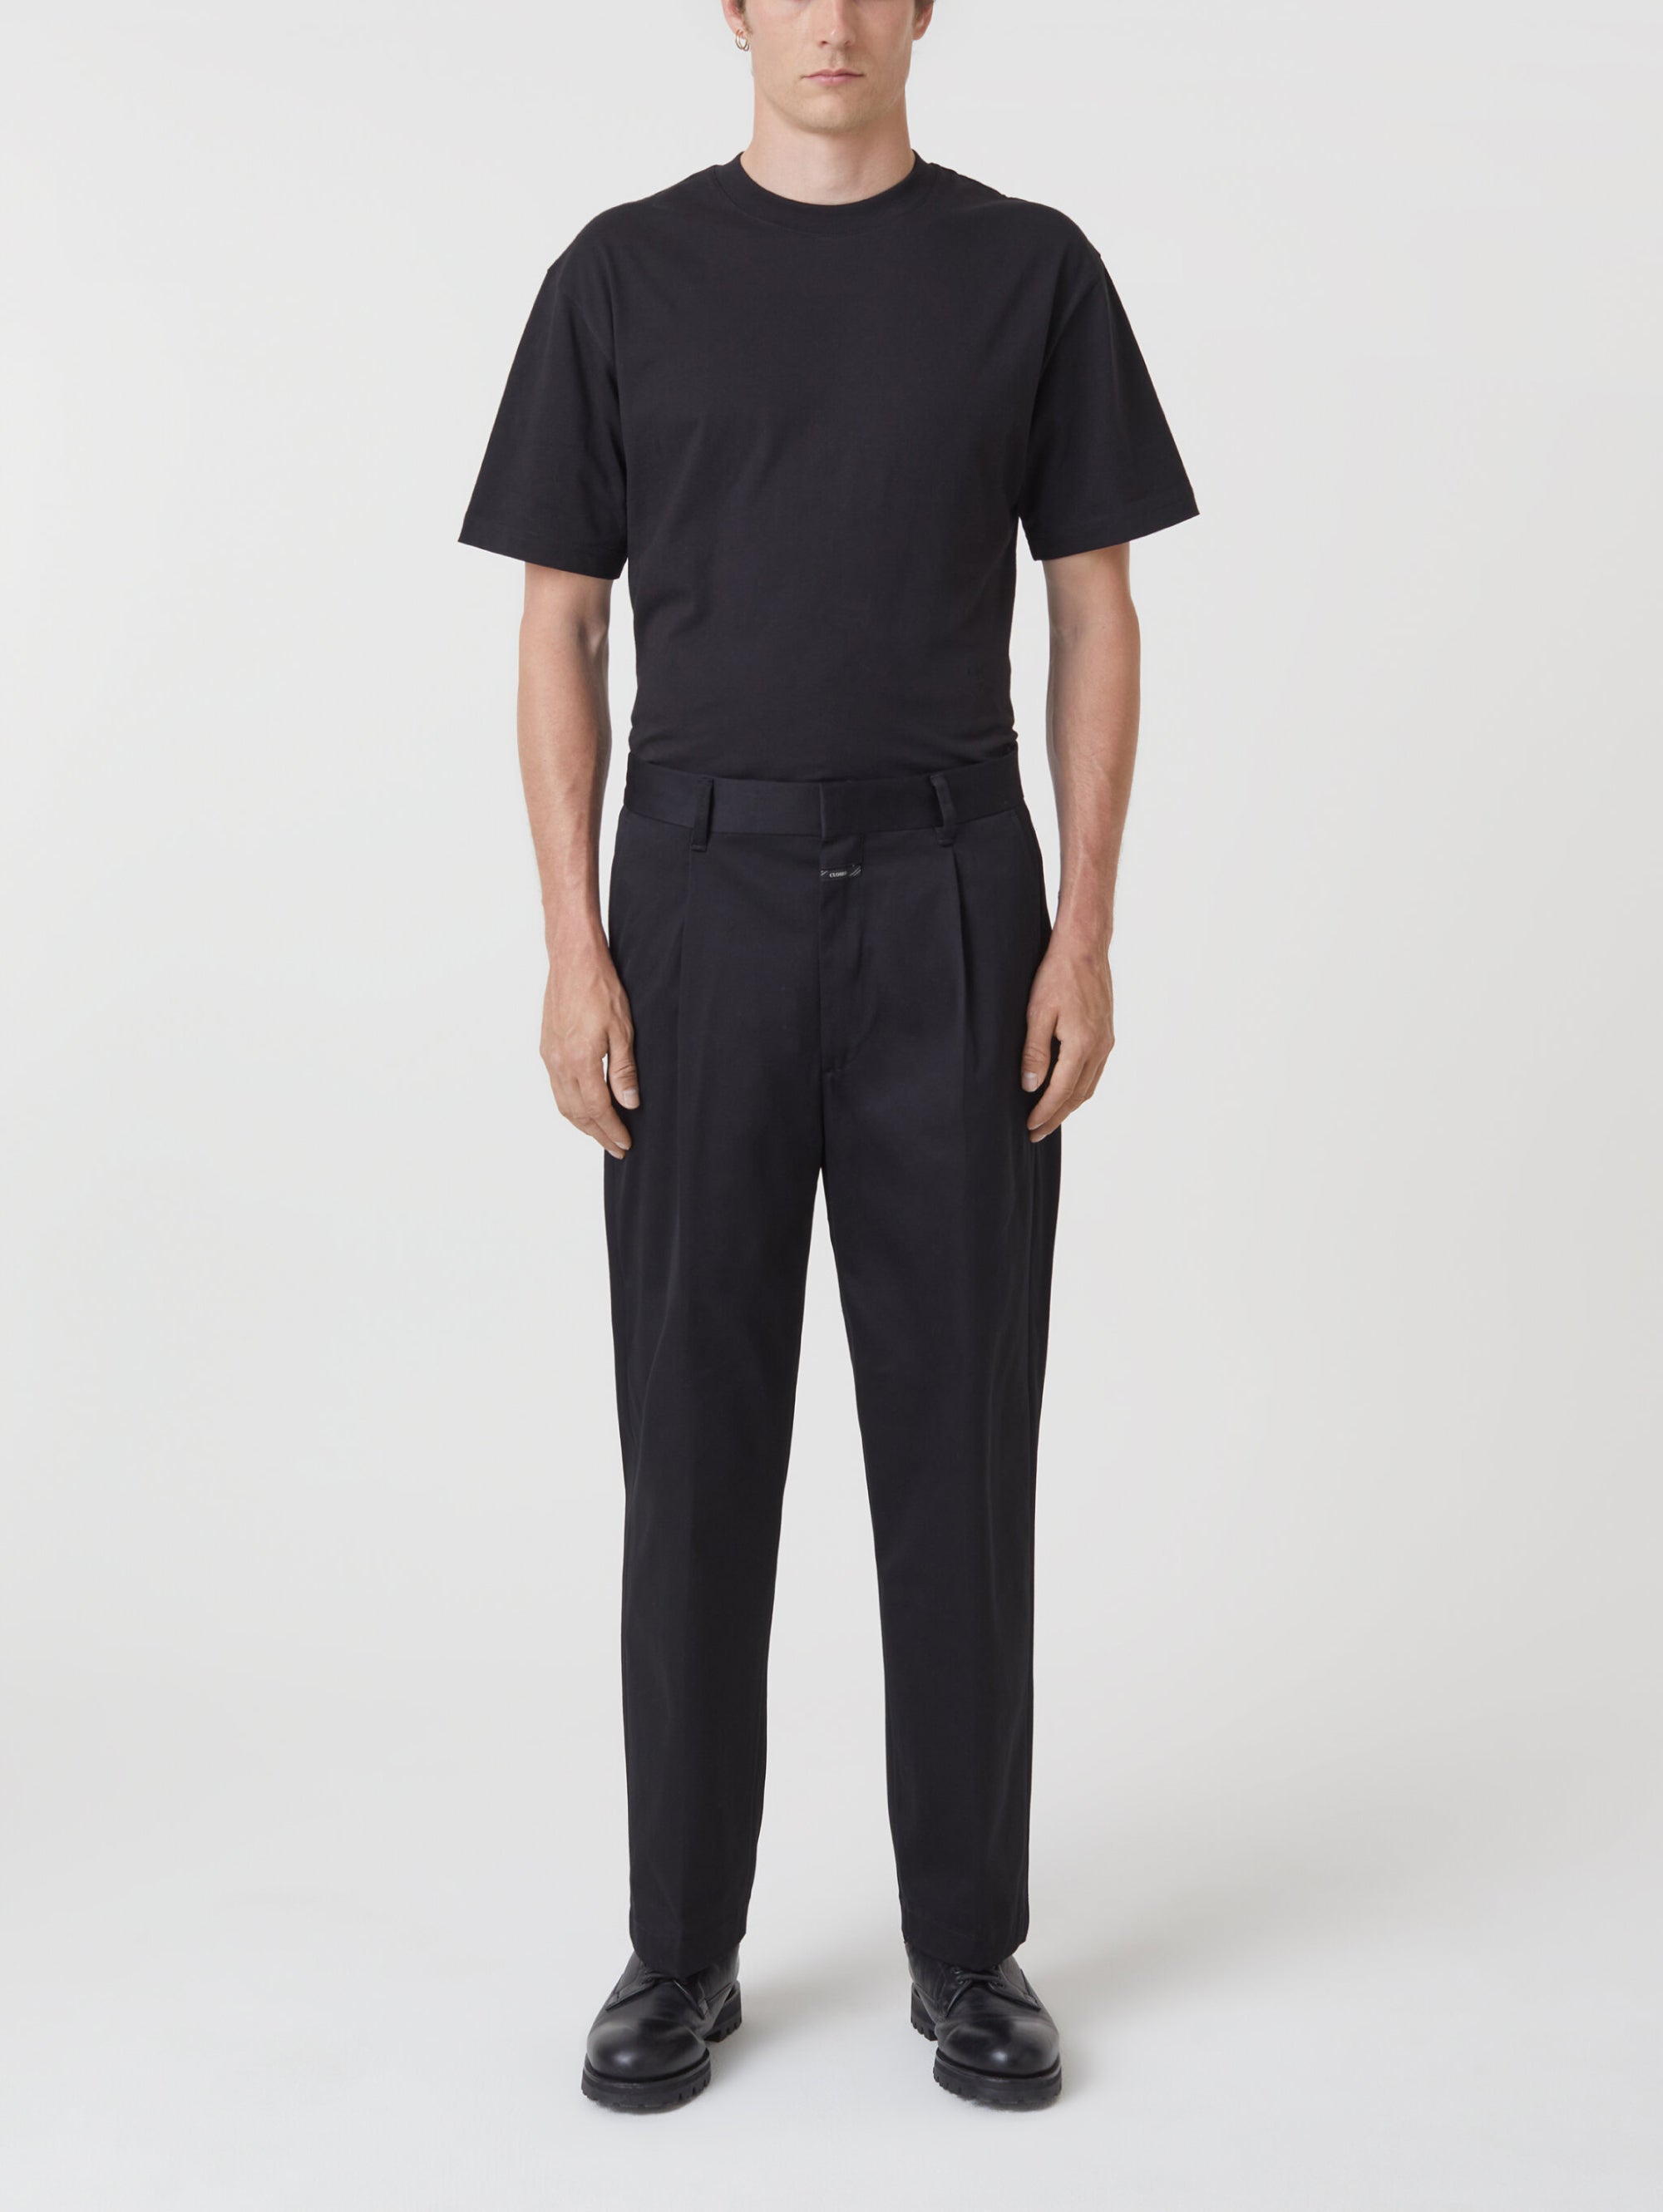 Wide Trousers with Black Pleats